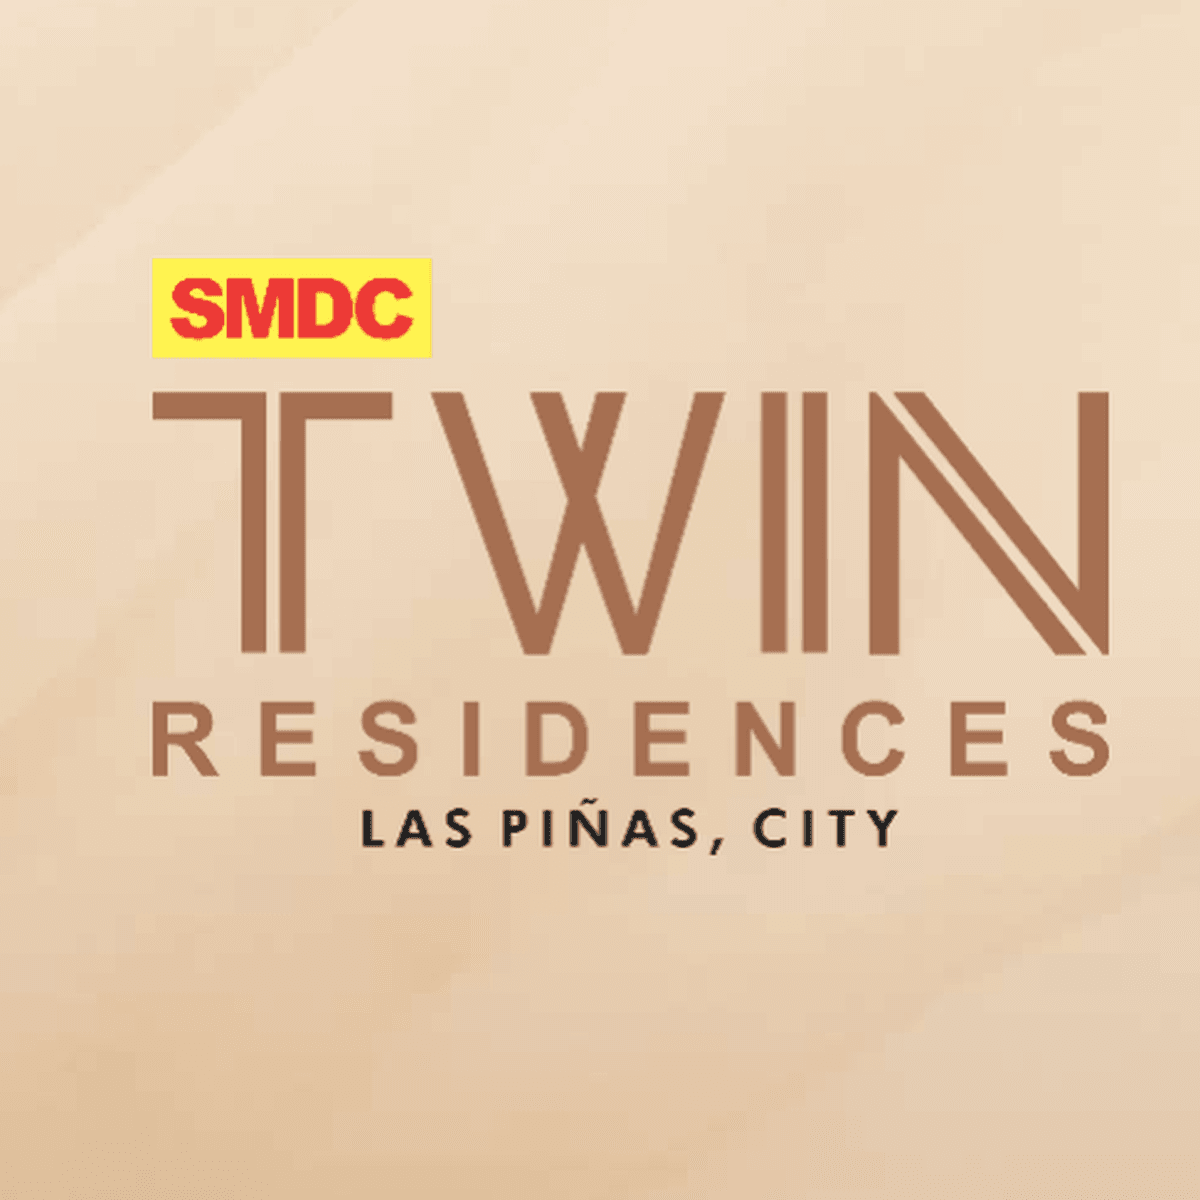 SMDC TWIN RESIDENCES